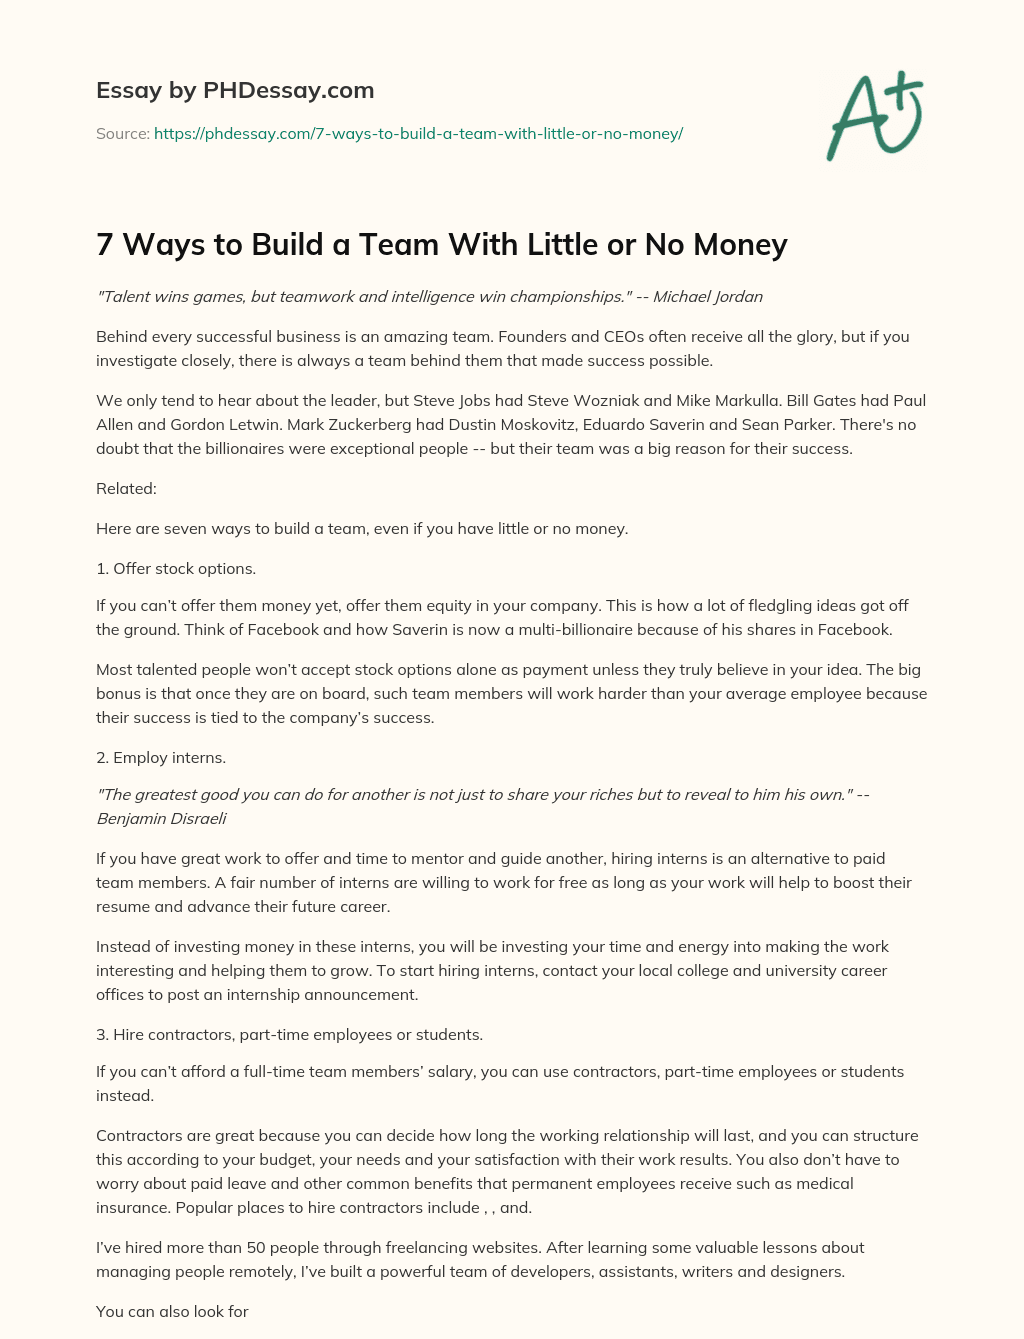 7 Ways to Build a Team With Little or No Money essay